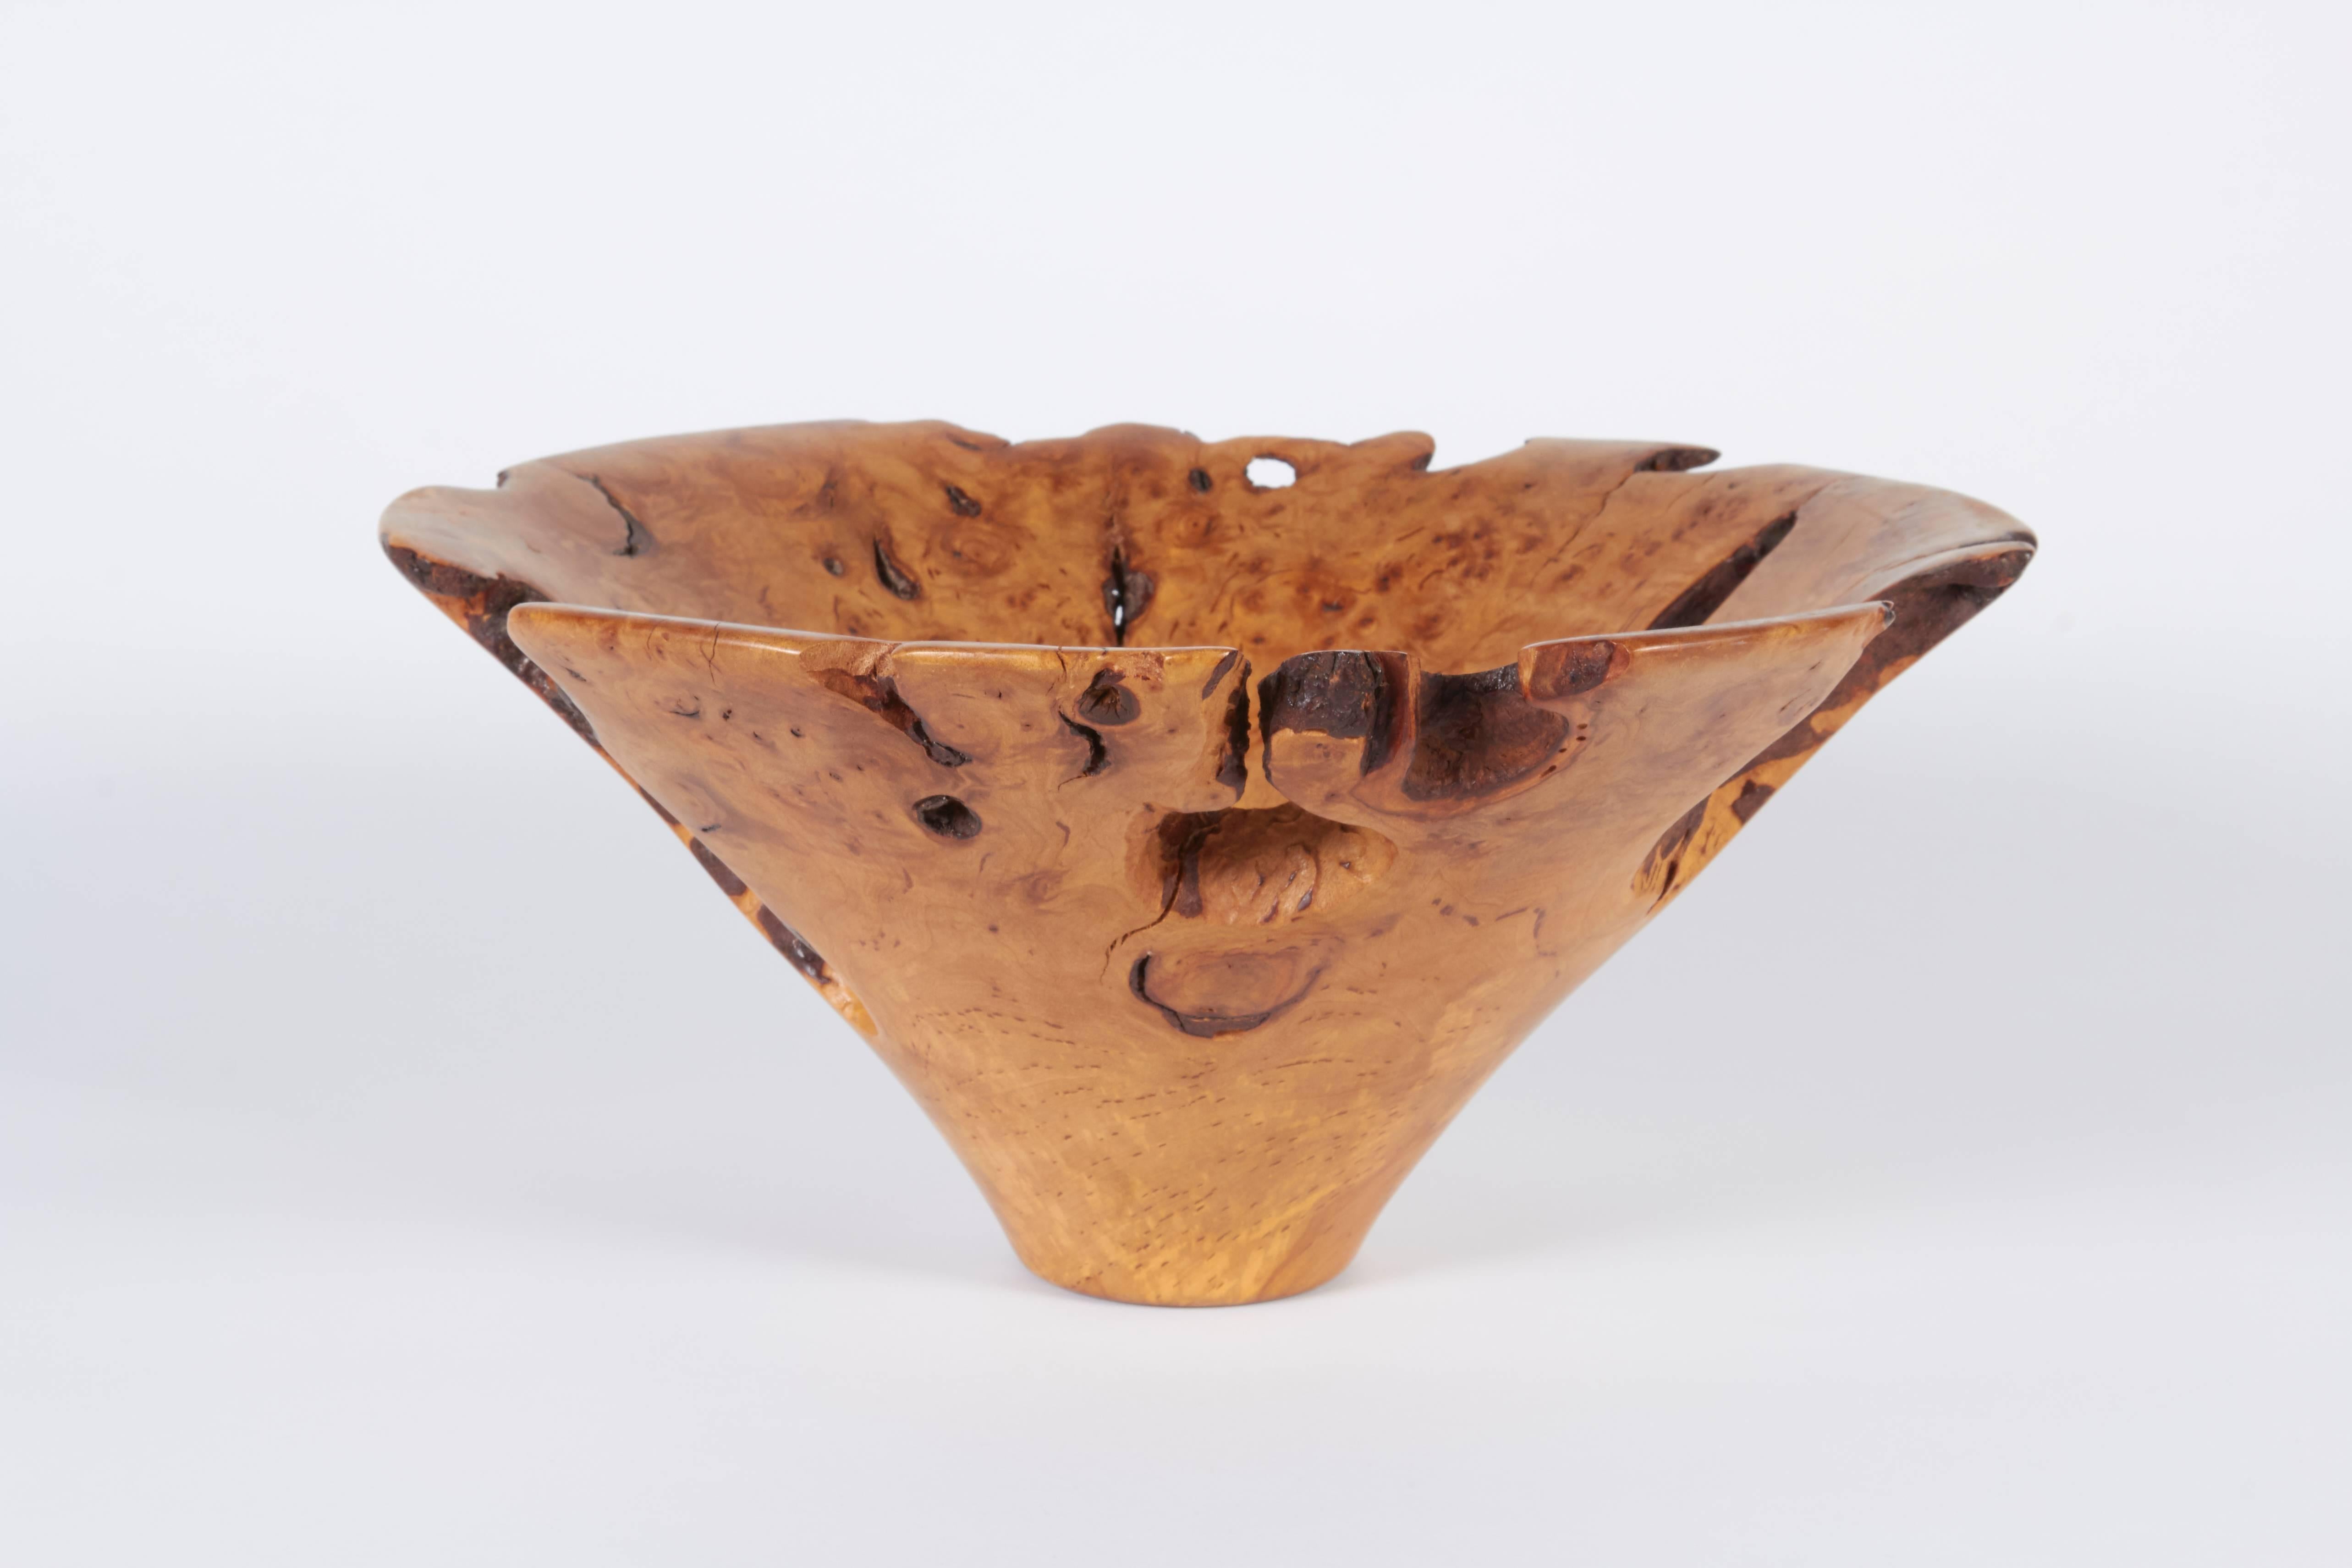 American Melvin & Mark Lindquist Birch Root Turned Bowl, Signed & Dated 1986